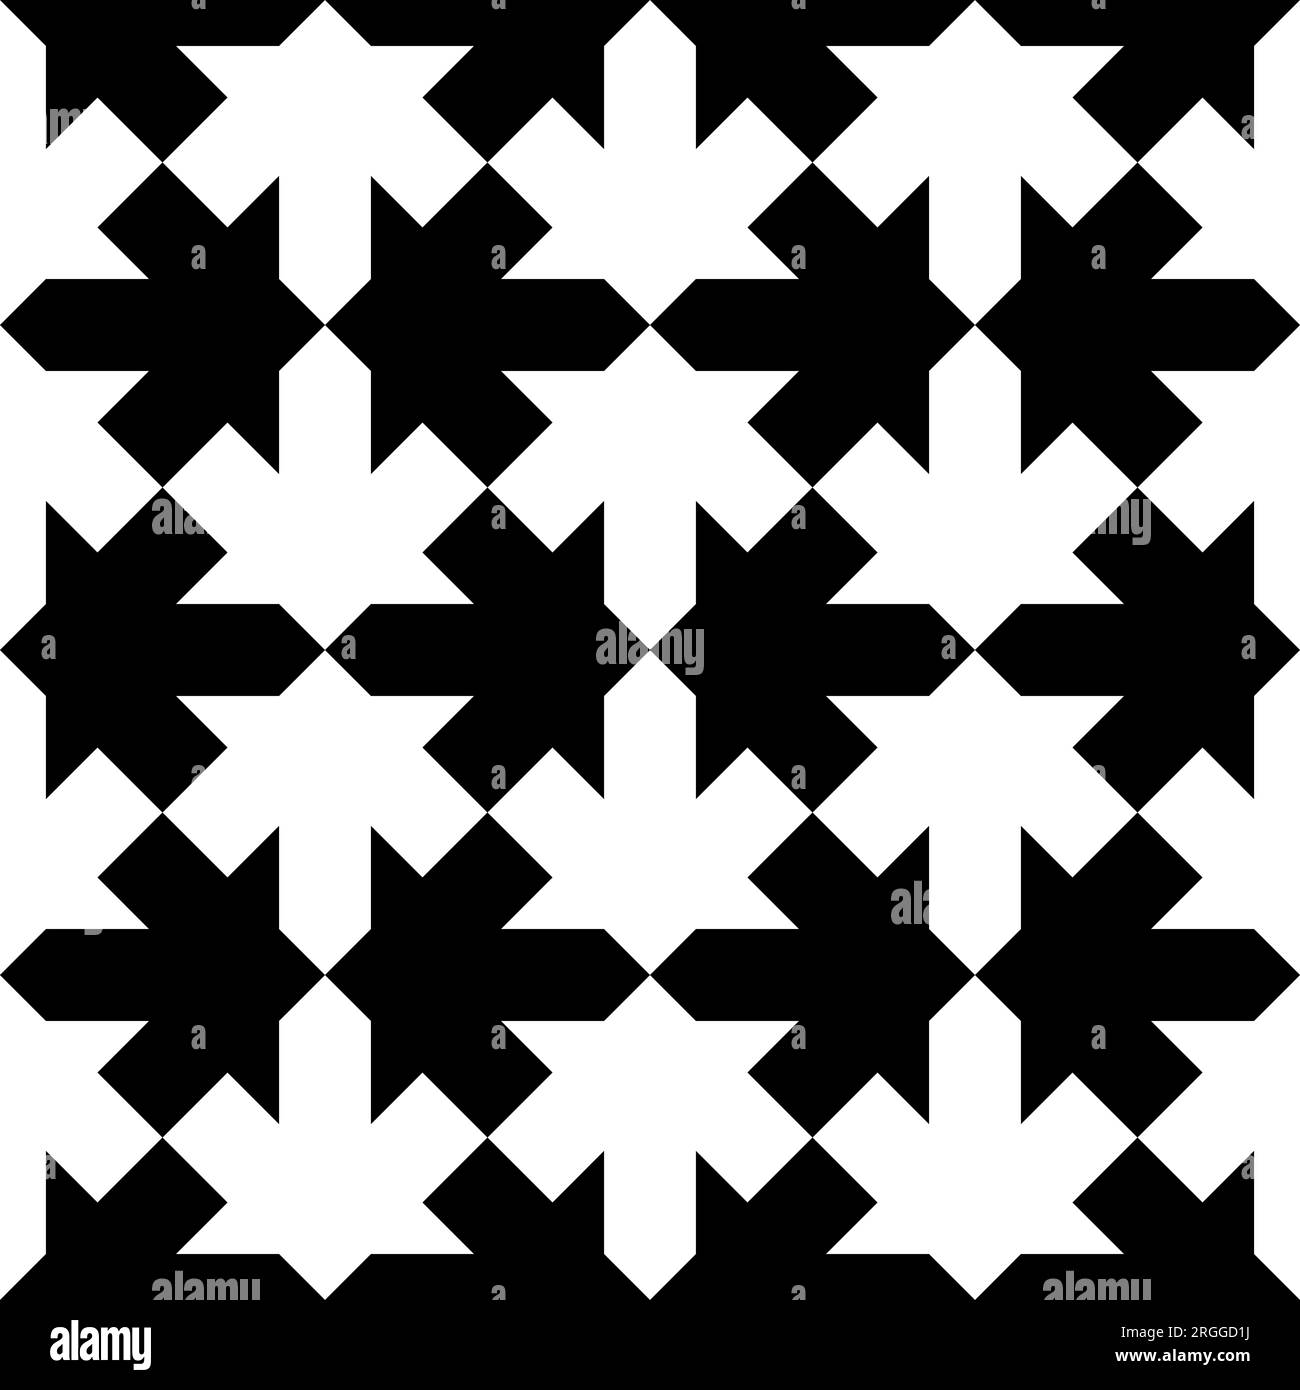 Equivocal figures and fluctuation of attention optical illusion. Looking at it constantly, it fluctuates between white over black and vice versa. Stock Photo